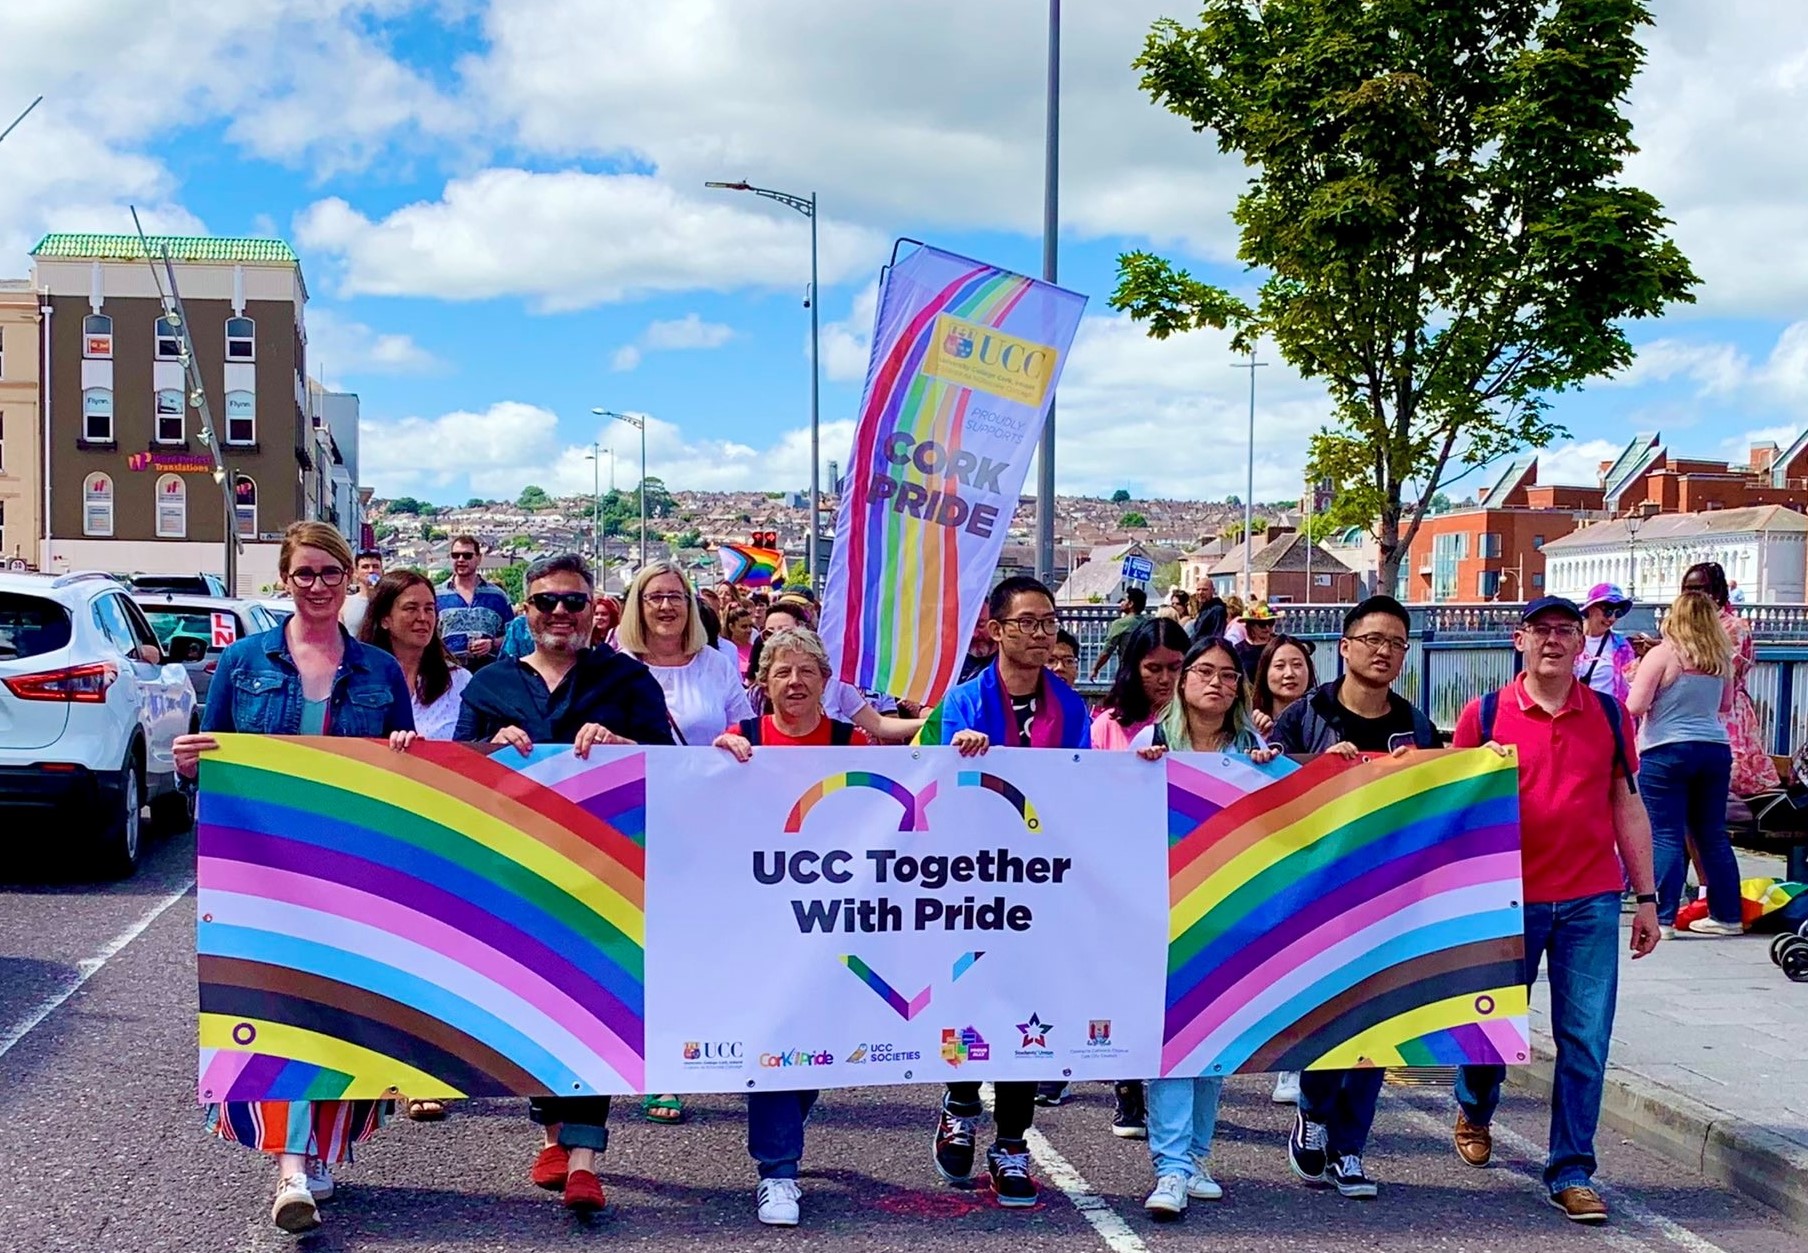 UCC Together With Pride Celebration